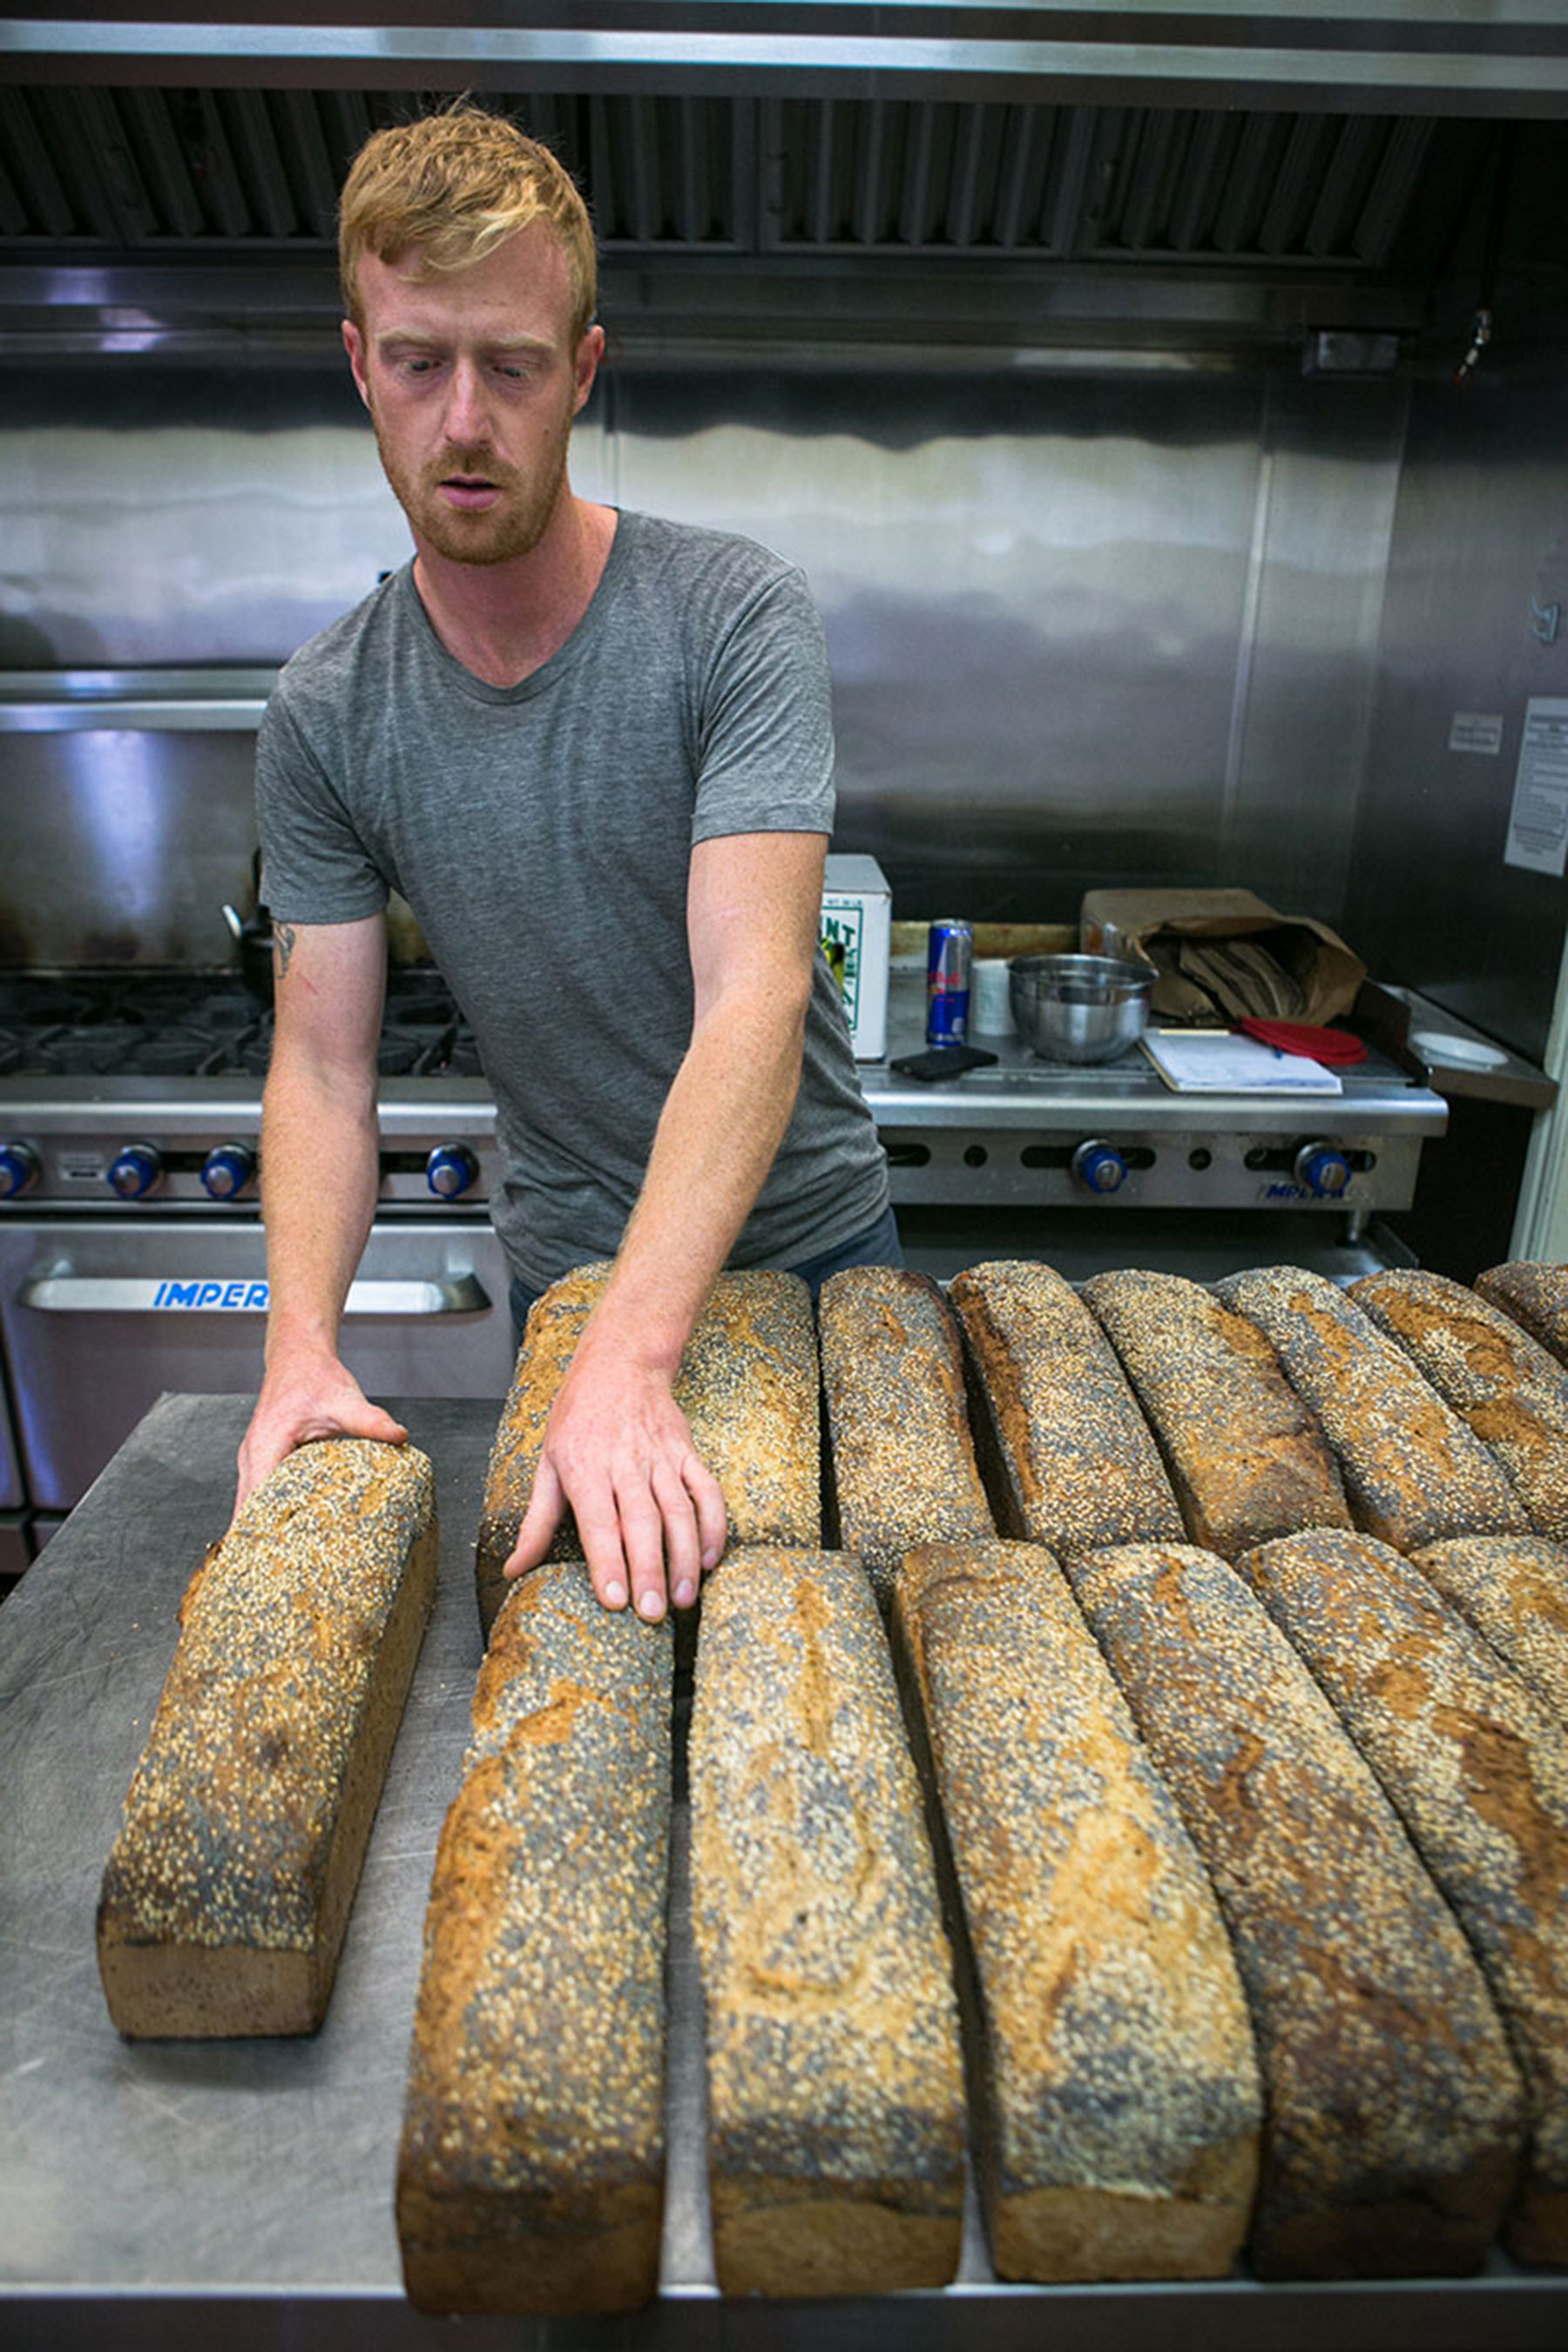 Eliot with the finished baked loaves